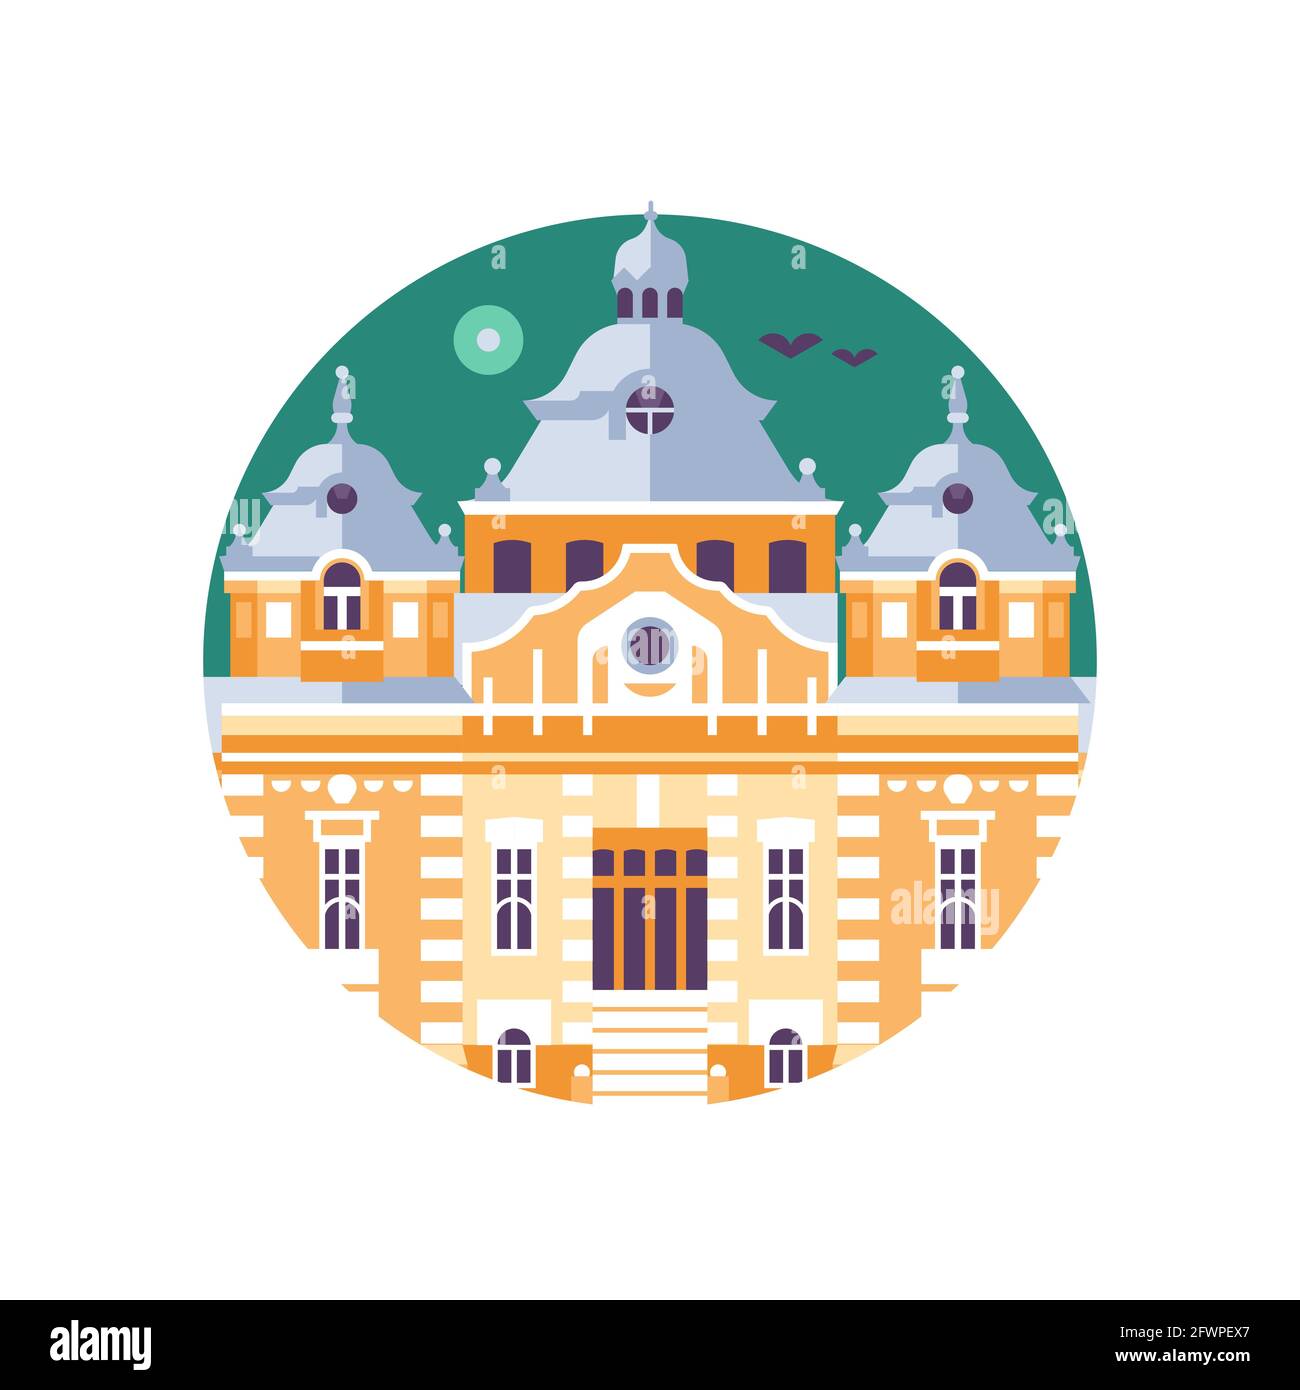 Hungary Thermal Bath Building Icon in Flat Stock Vector